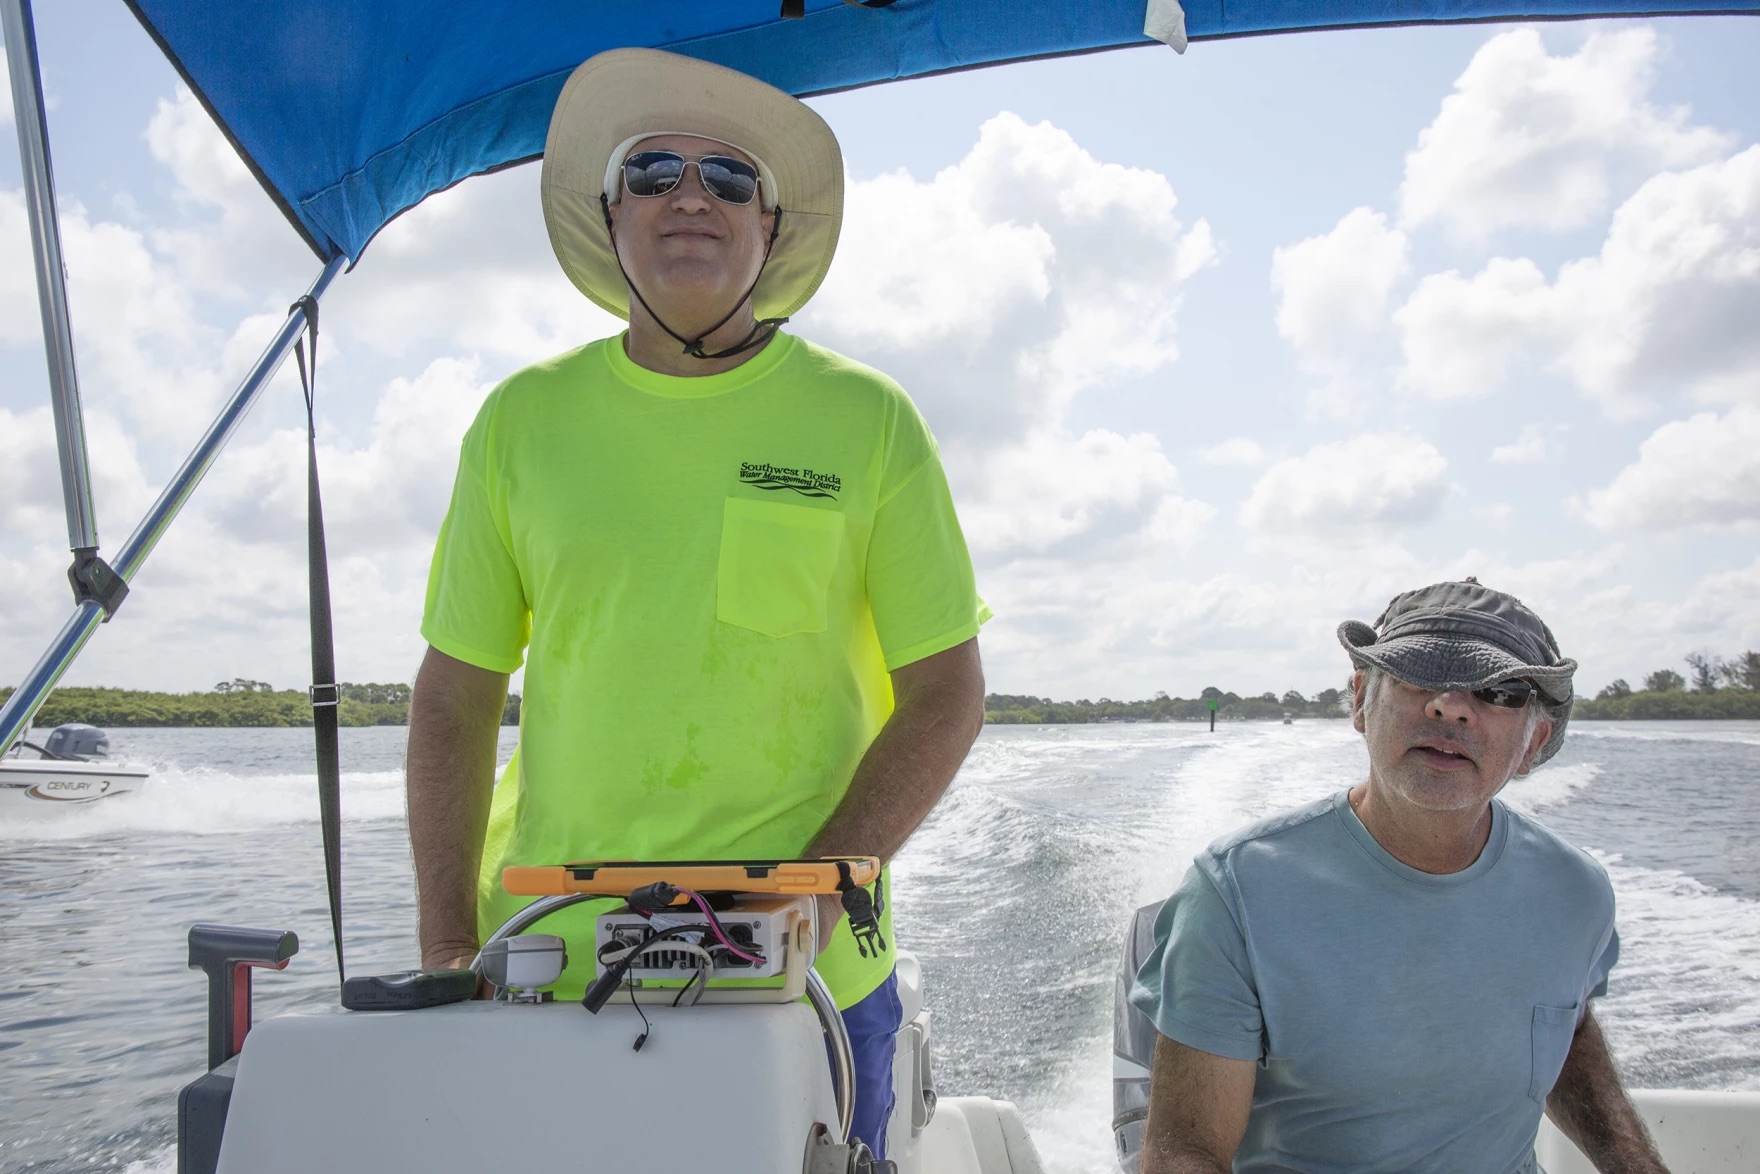 two older white men on a boat, both wearing hats and sunglasses. the one on the left is steering the boat, and there's a wake of the boat's water in the background